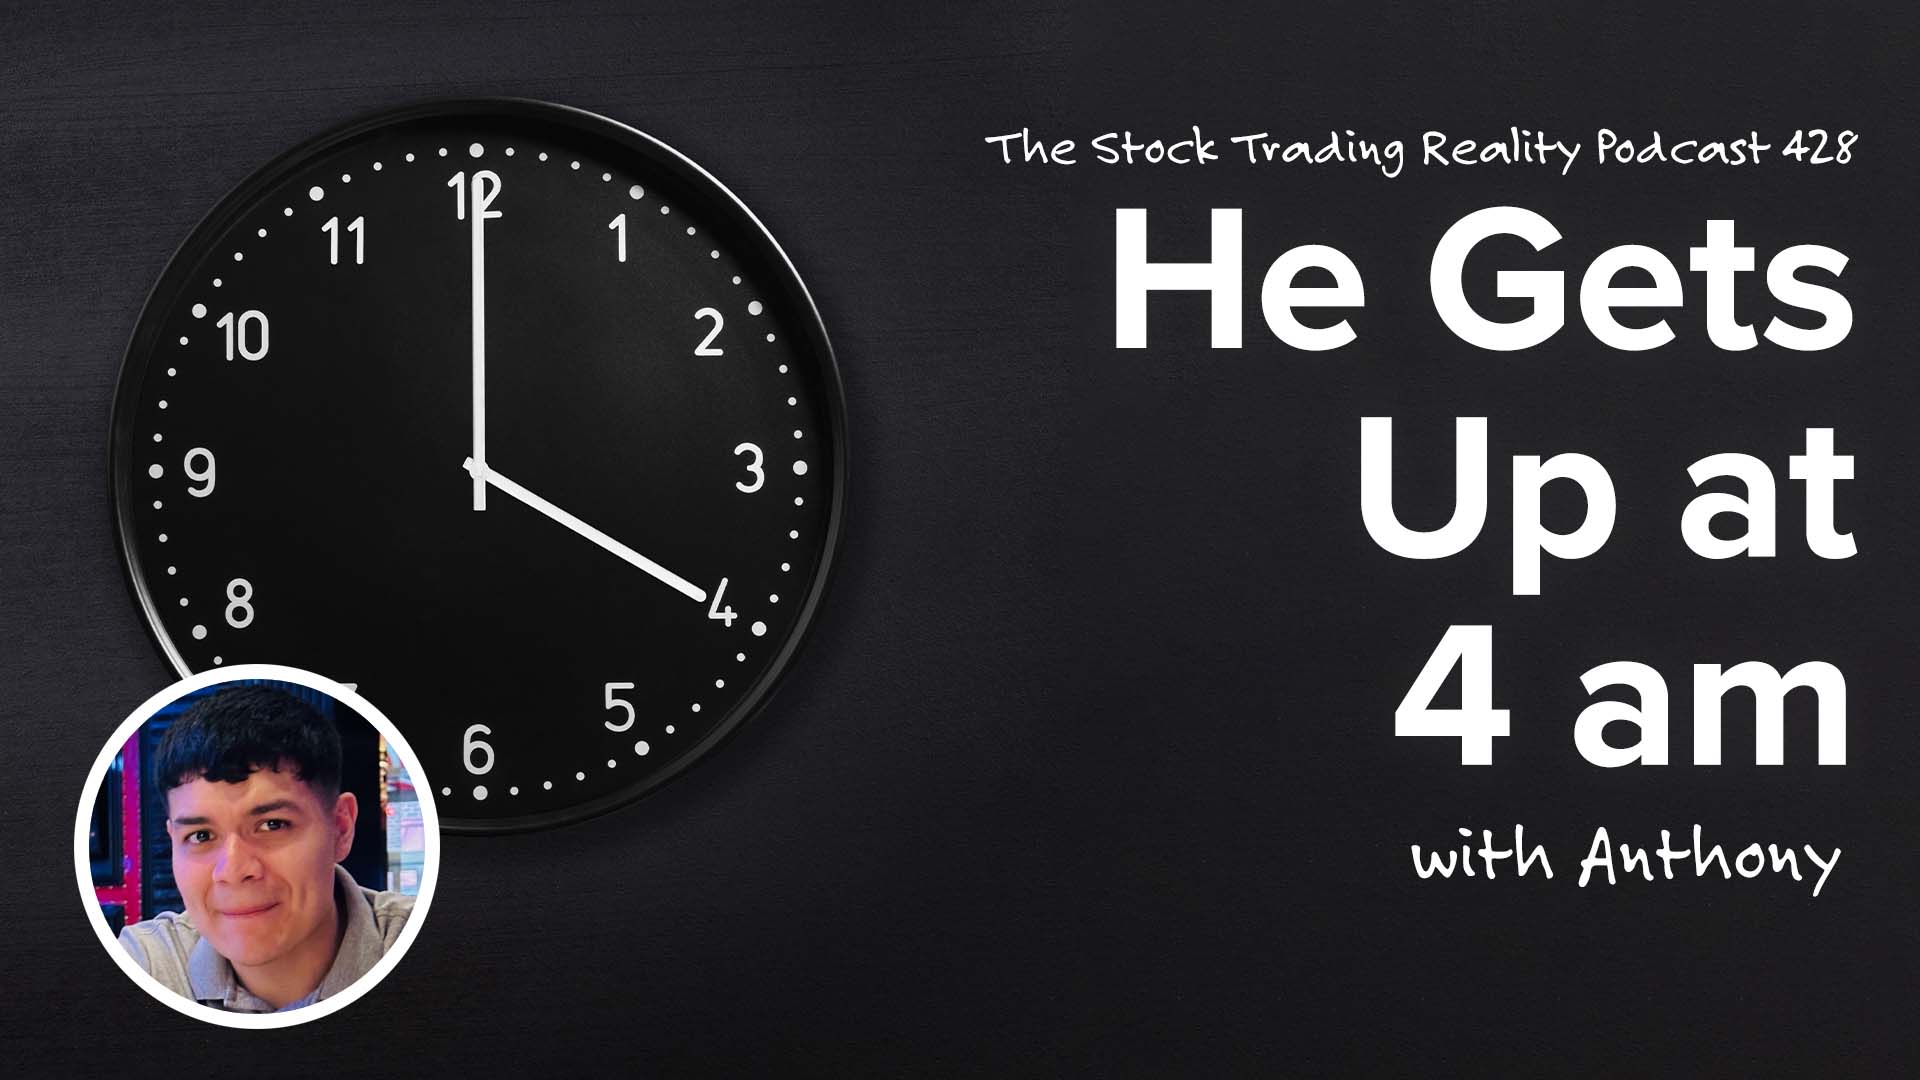 He Gets Up at 4 am | STR 428